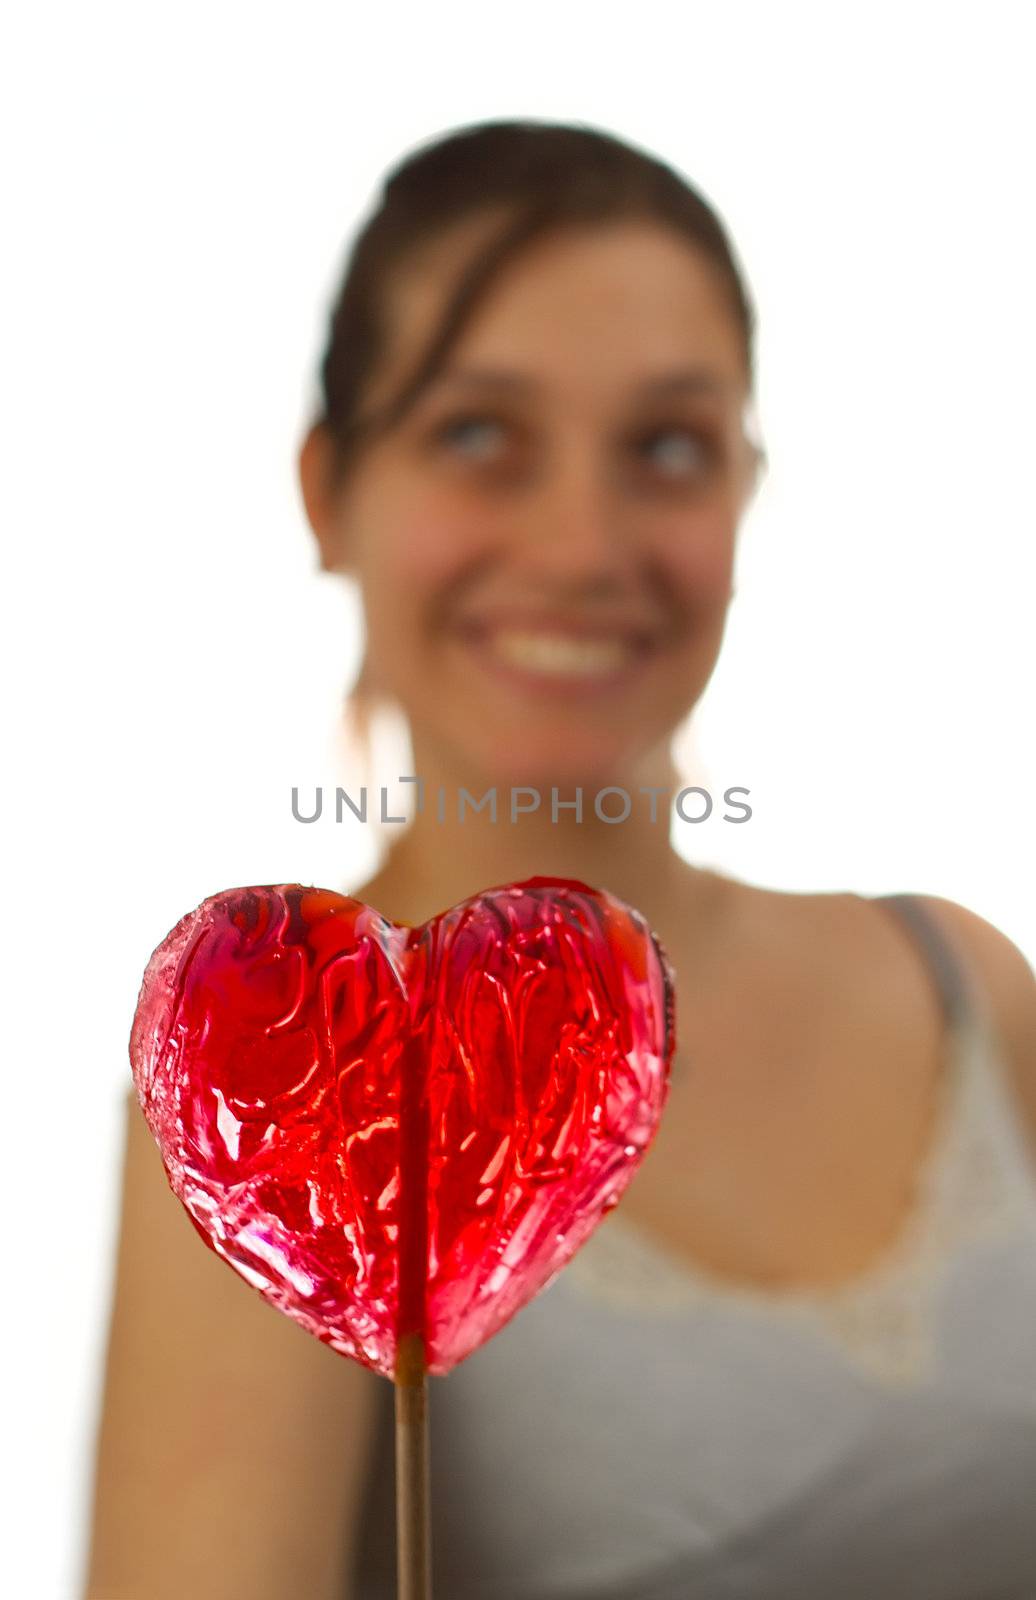 Happy young woman behind heart shaped lollipop, isolated over white